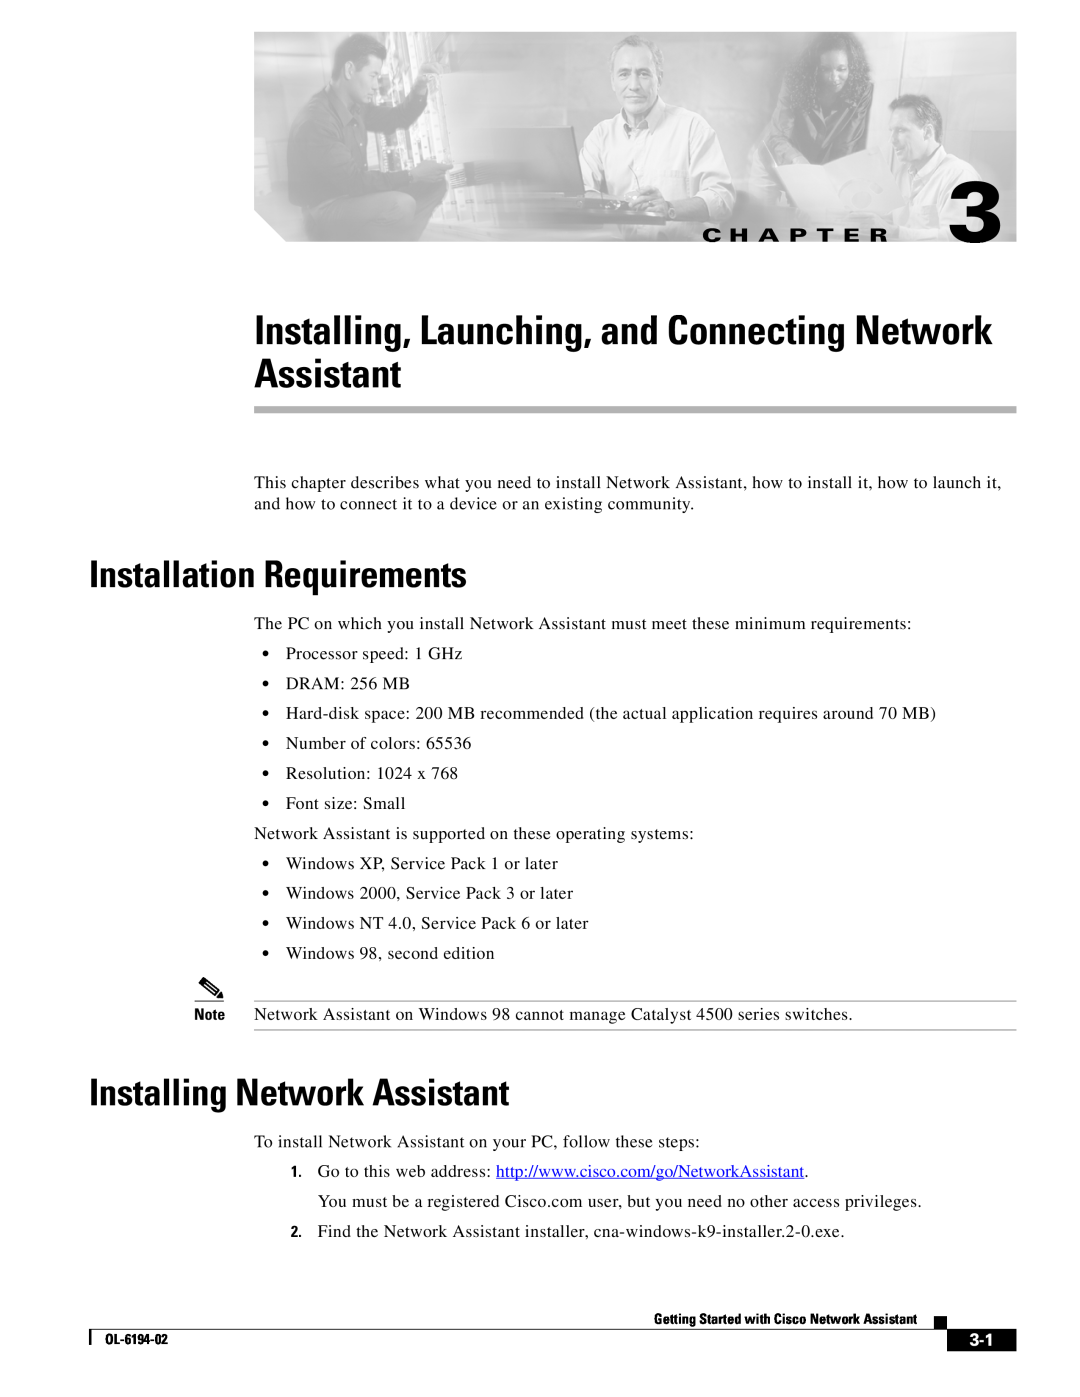 Cisco Systems and Connecting Network Assistant, Launching manual Installation Requirements, Installing Network Assistant 